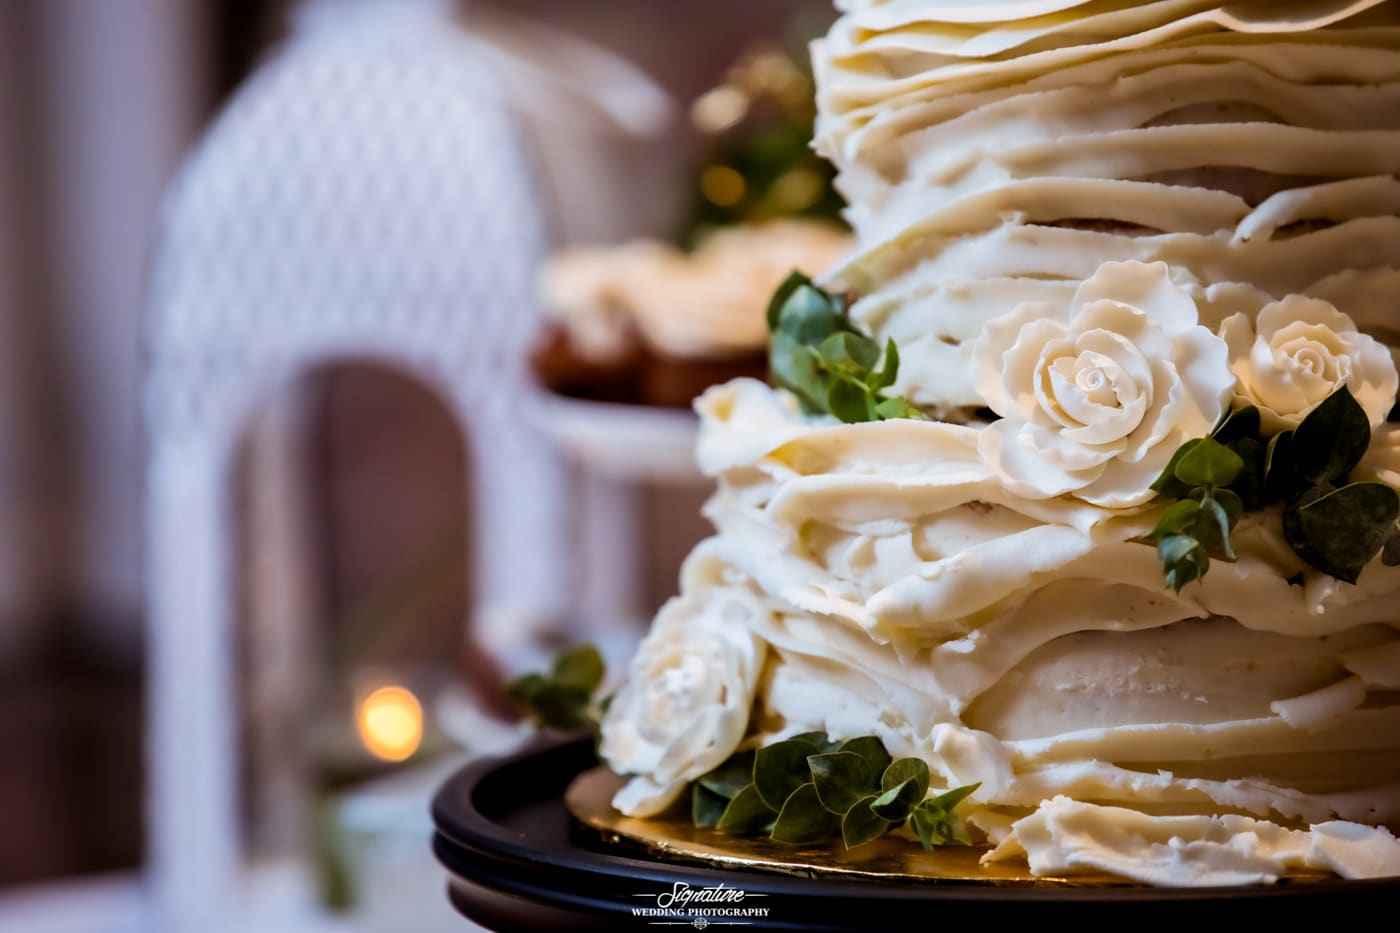 Close up of wedding cake with flowers